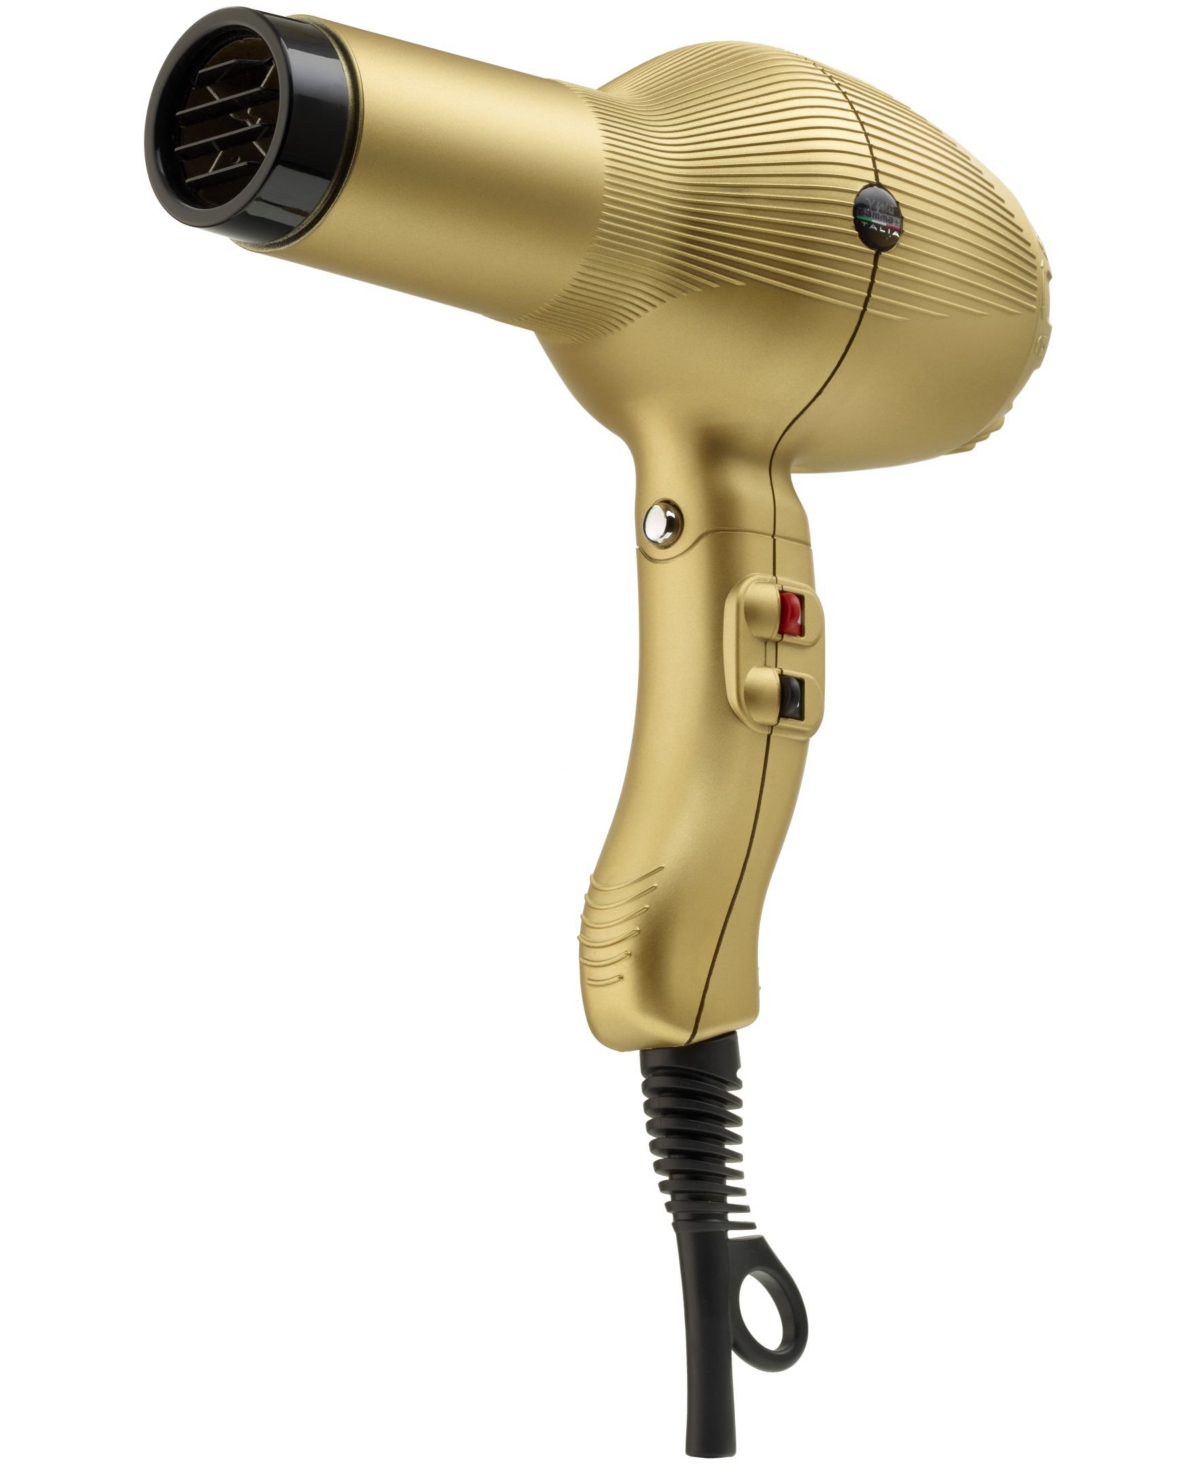 Absolute Power Tourmaline Ionic Professional Hair Dryer - Gold-Tone